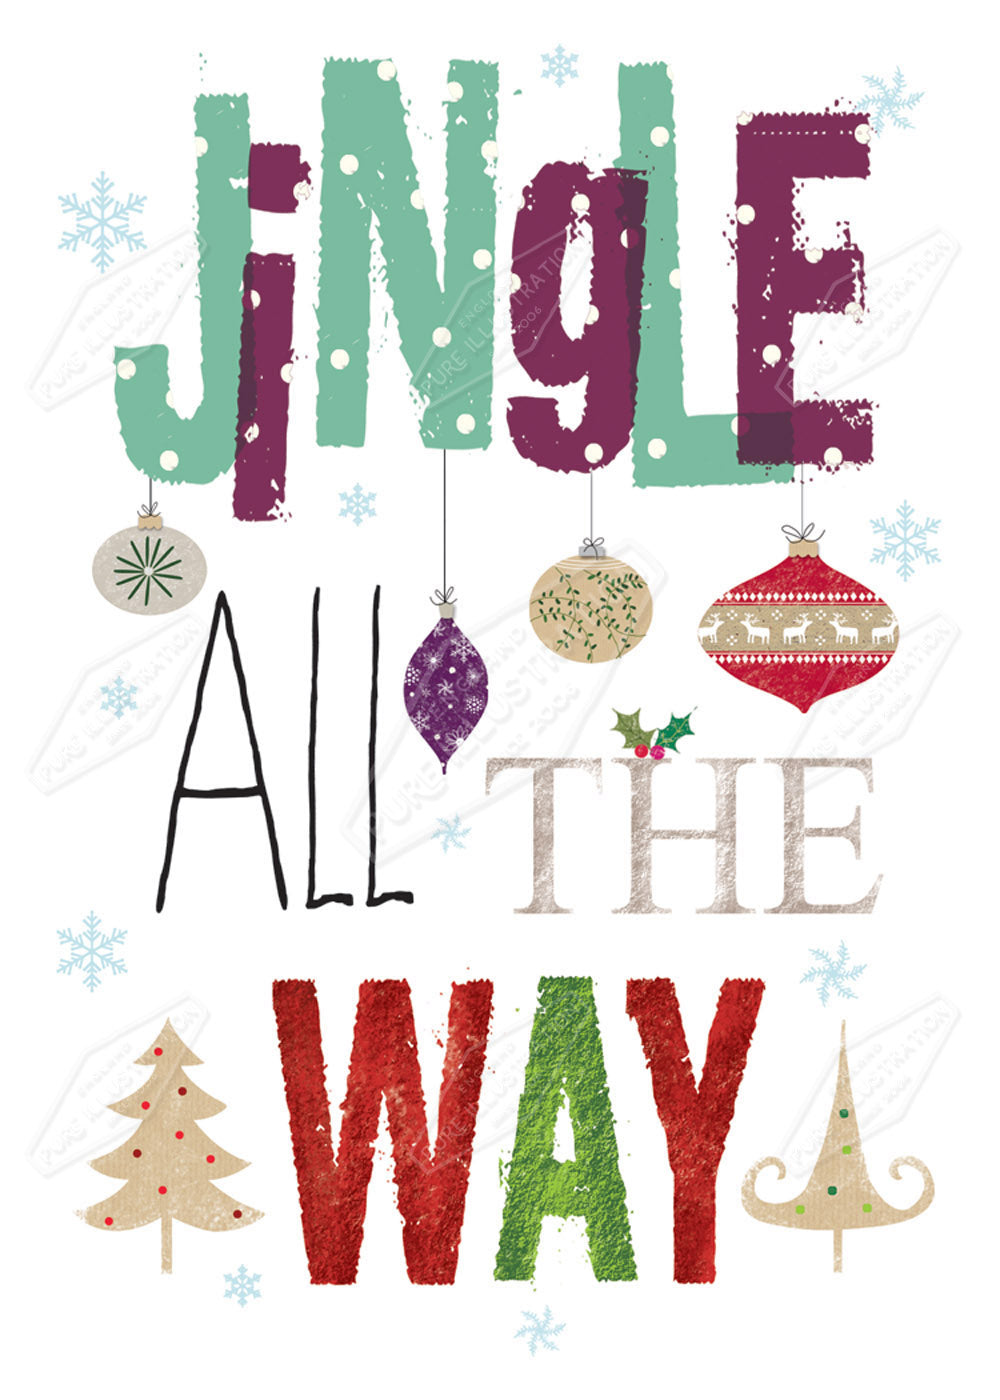 00029603CRE Christmas Text Design by Cory Reid for Pure Art Licensing Agency